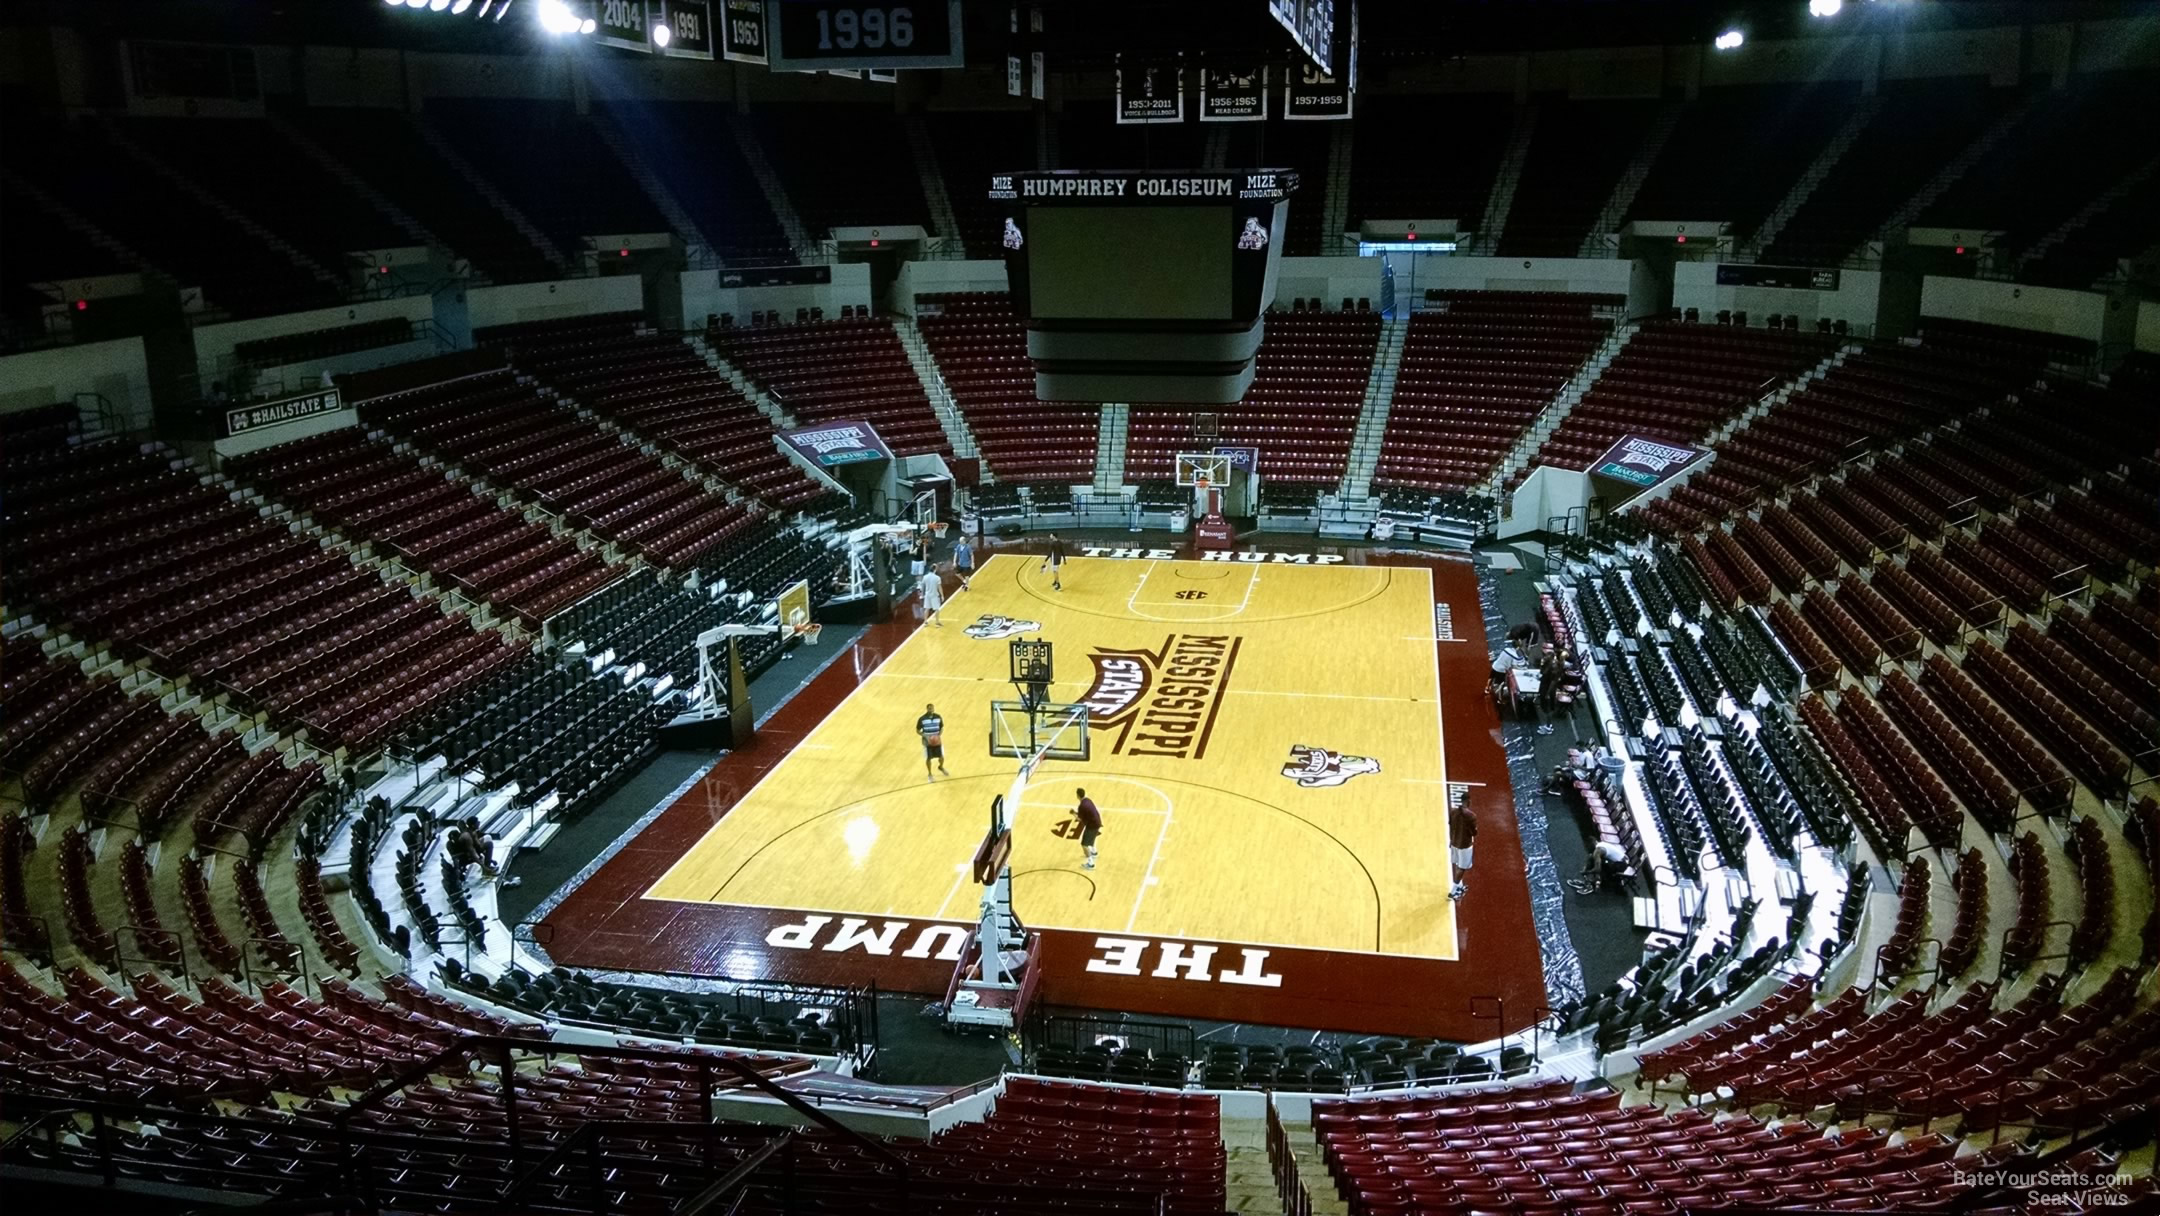 section 236, row 8 seat view  - humphrey coliseum